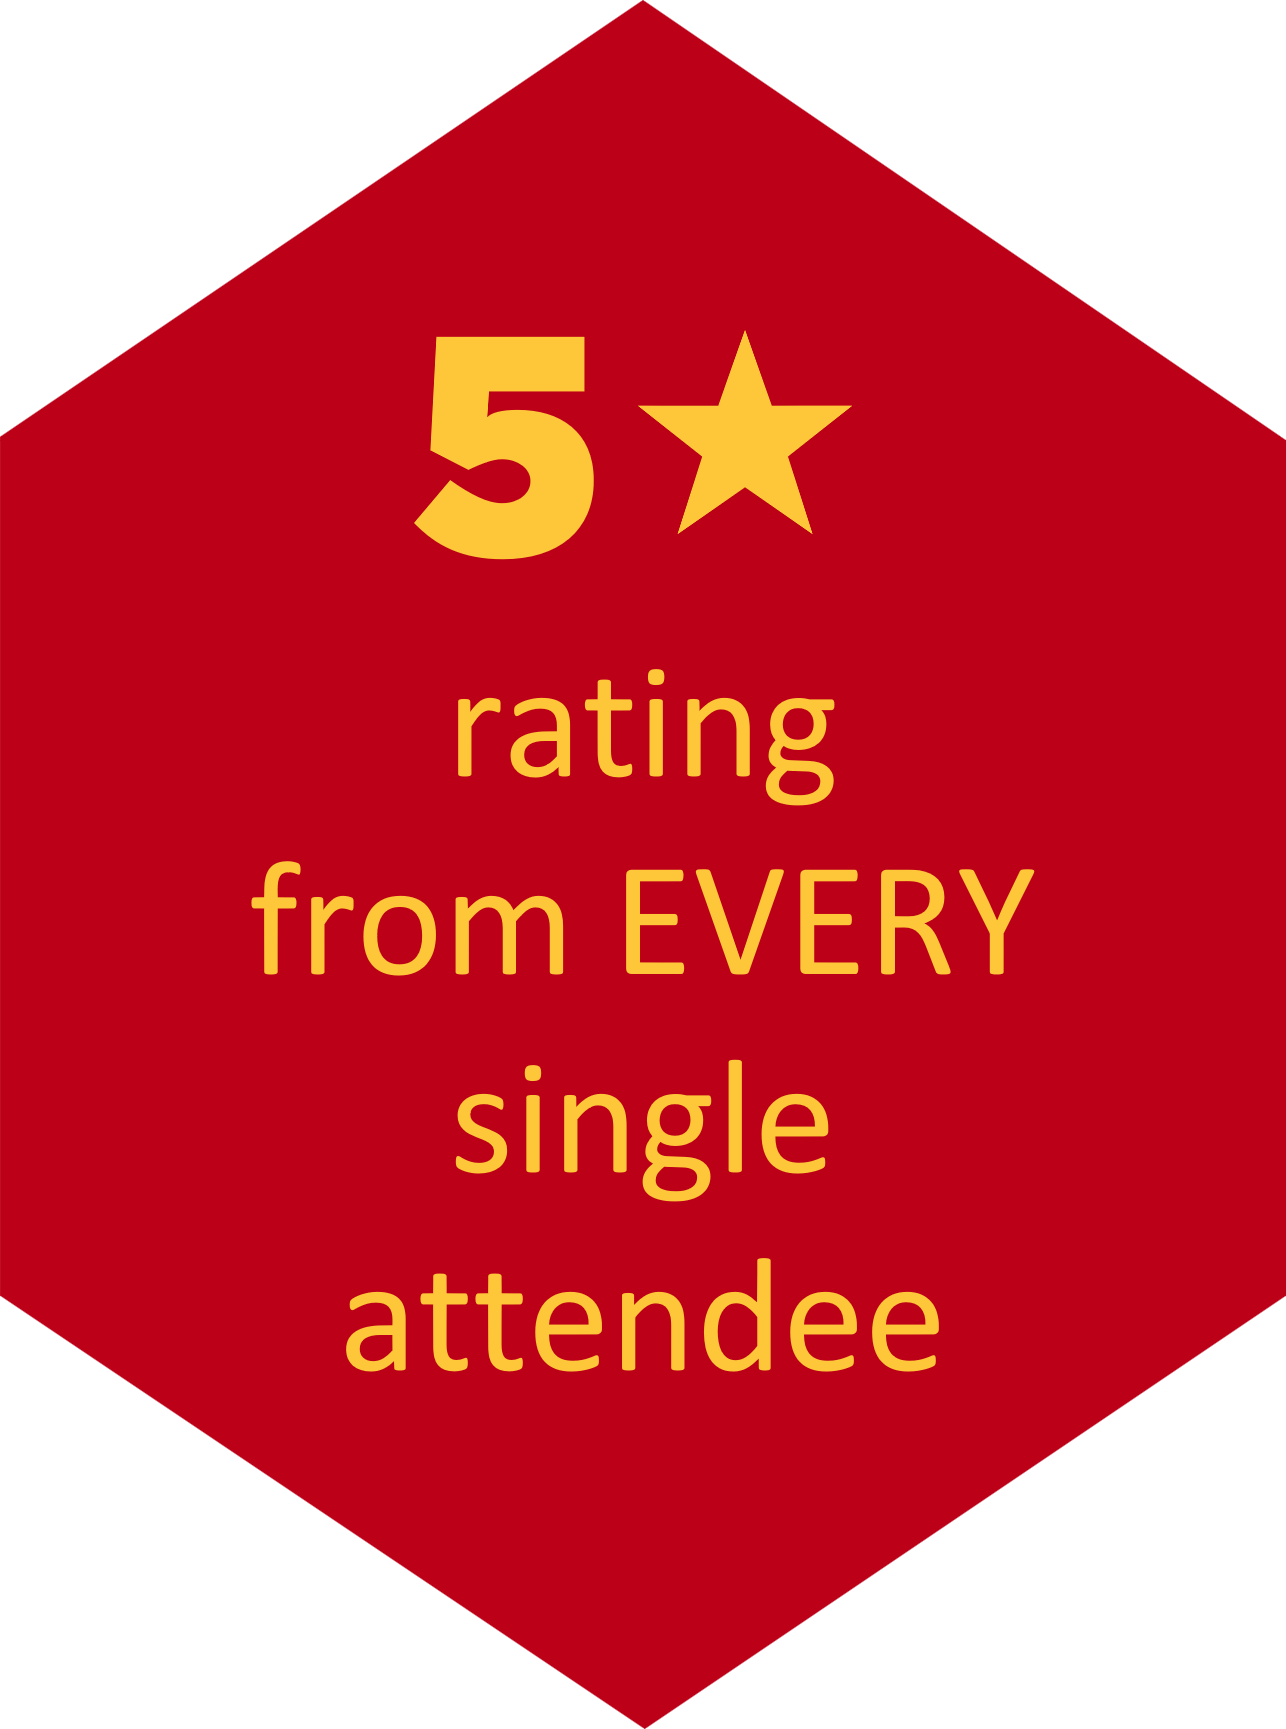 A bright red hexagon with yellow text inside it saying '5 star rating from EVERY single attendee'.